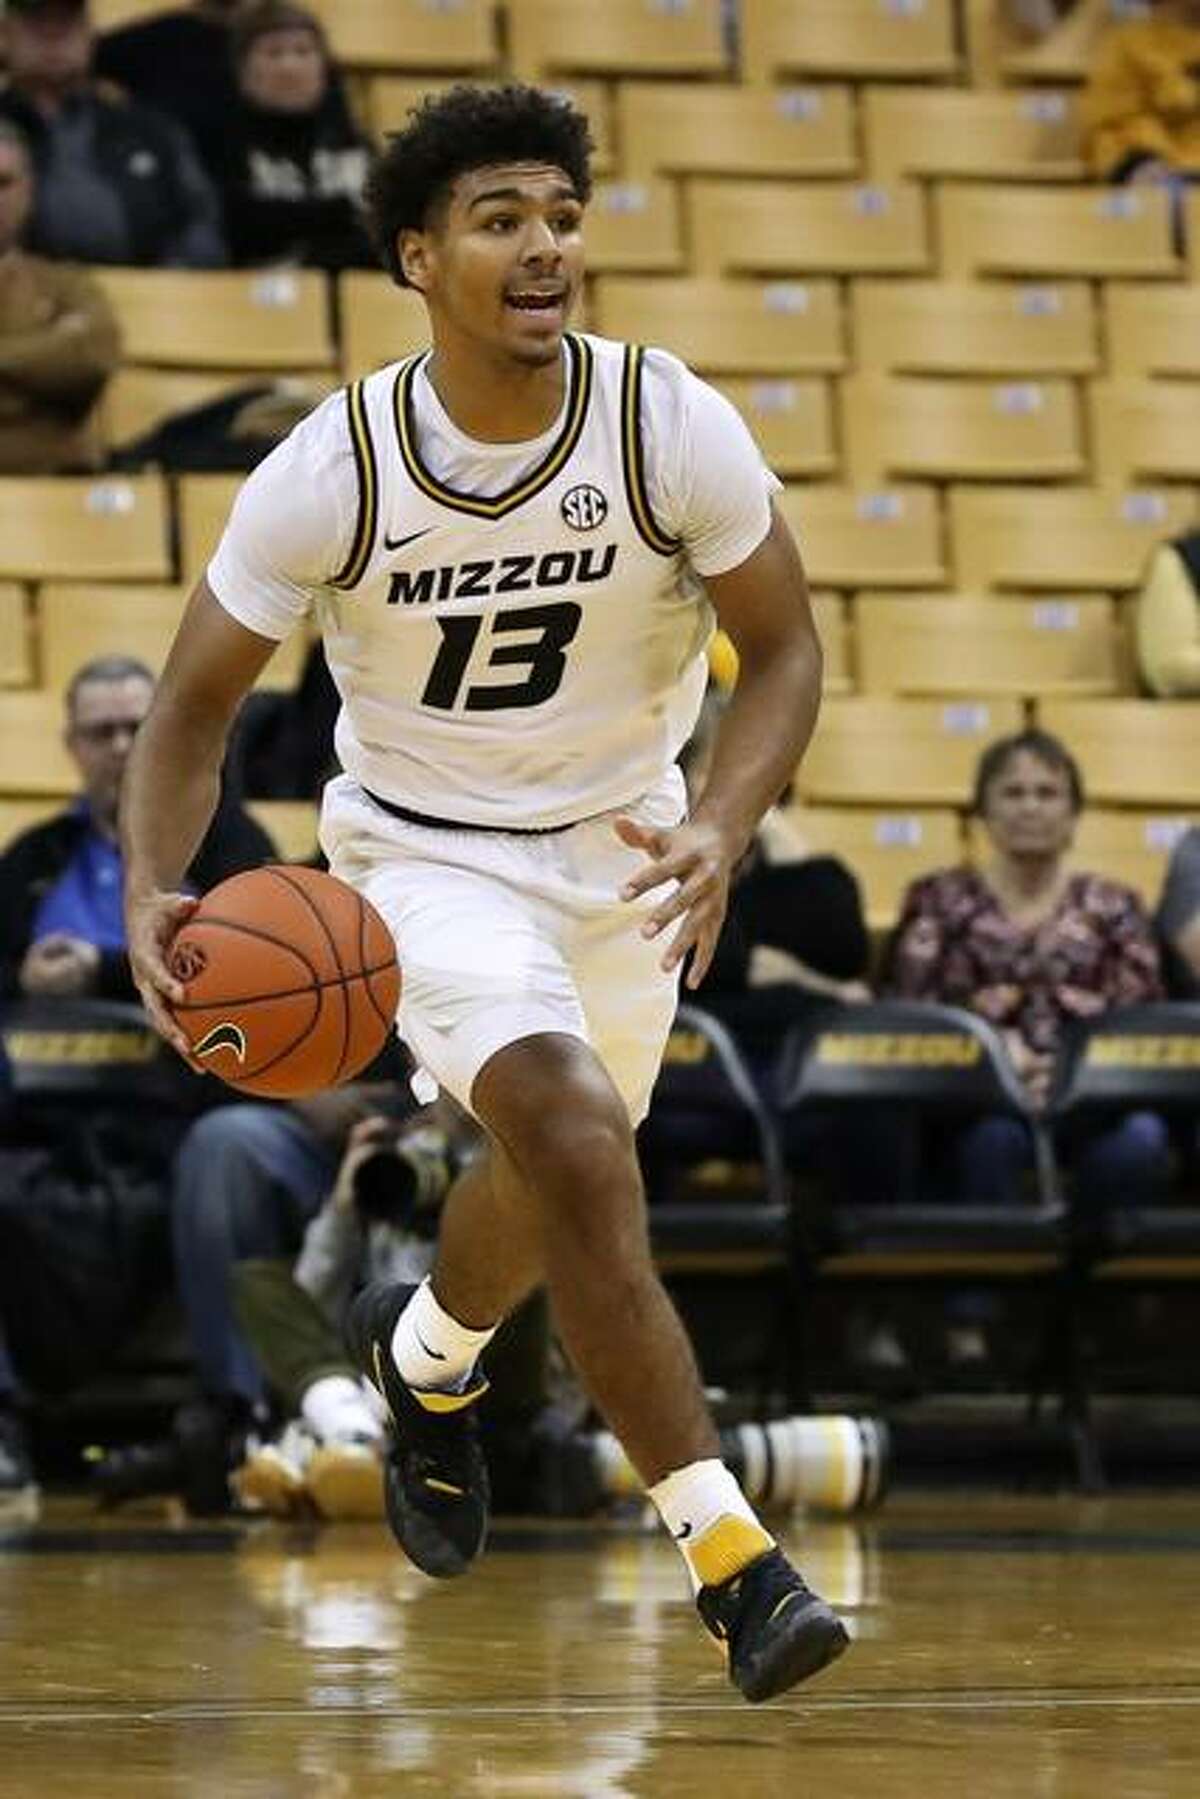 Missouri junior Mark Smith drives down the court in an 80-56 exhibition win over Central Missouri on Nov. 1 at Mizzou Arena.